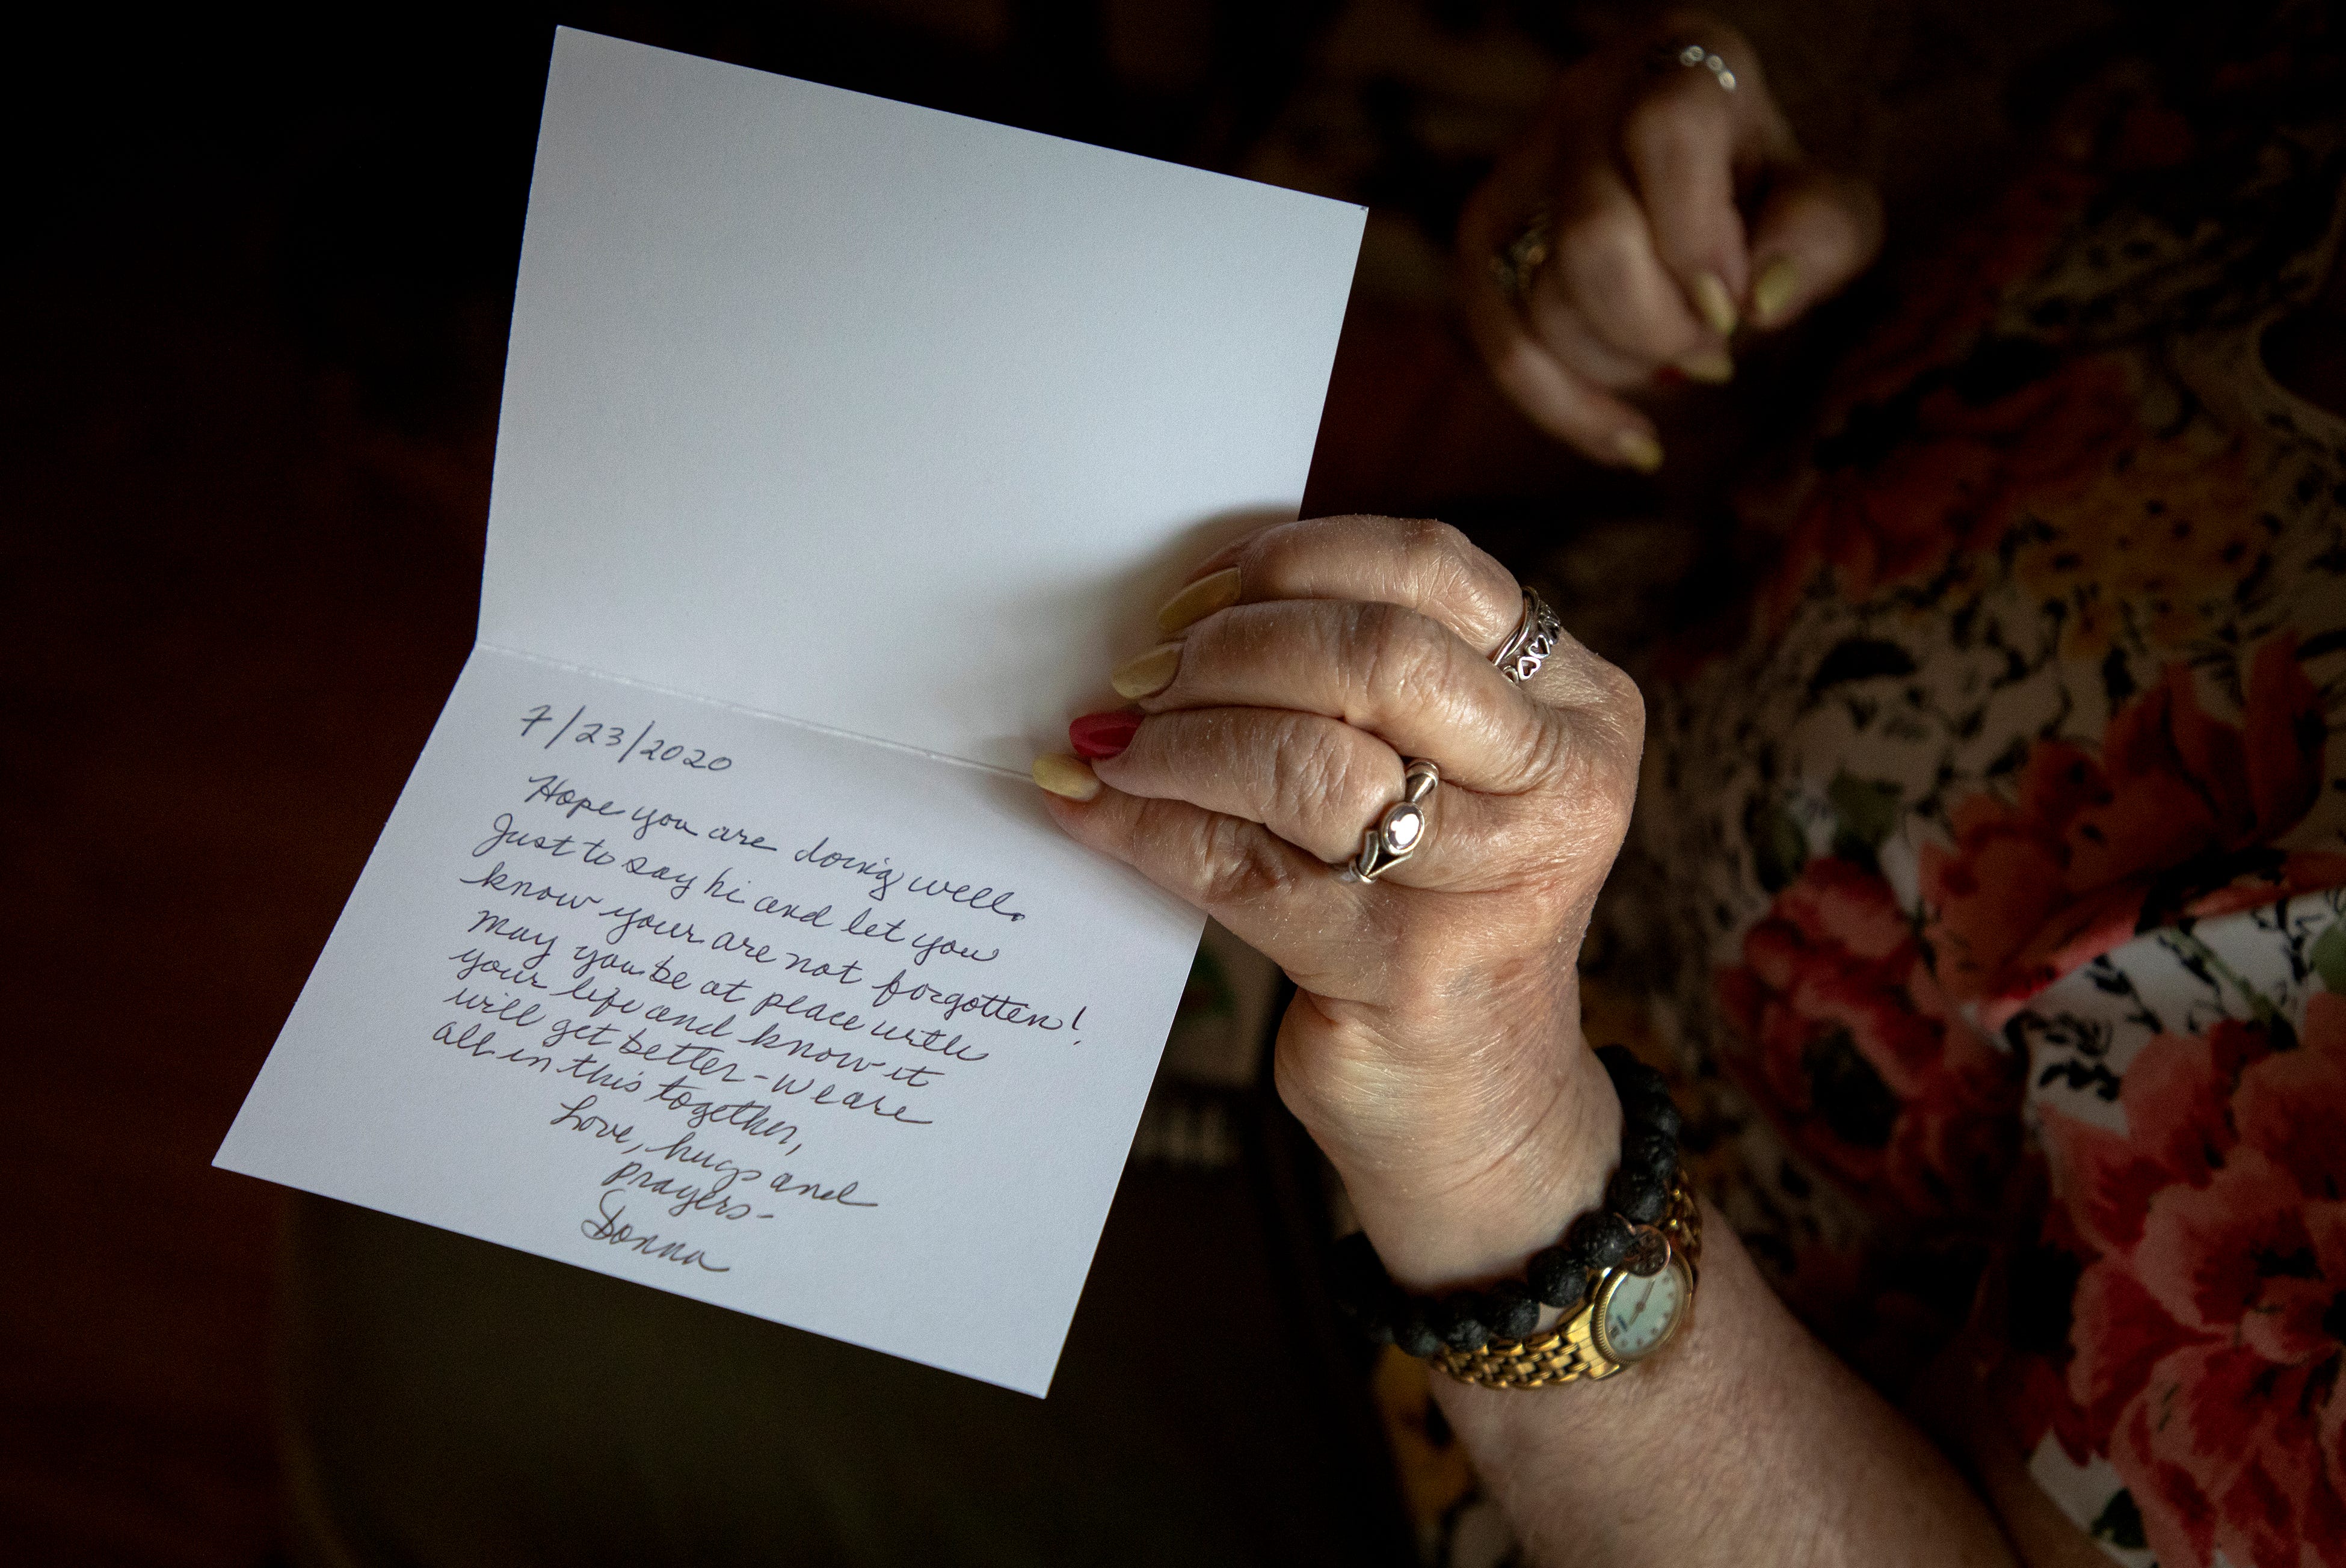 Donna Kinney, a cancer survivor who lives alone has stayed in her O’Bryonville apartment for most of this year to avoid the coronavirus. She spends time every week writing notes and mailing them to friends and acquaintances she can no longer see in person.